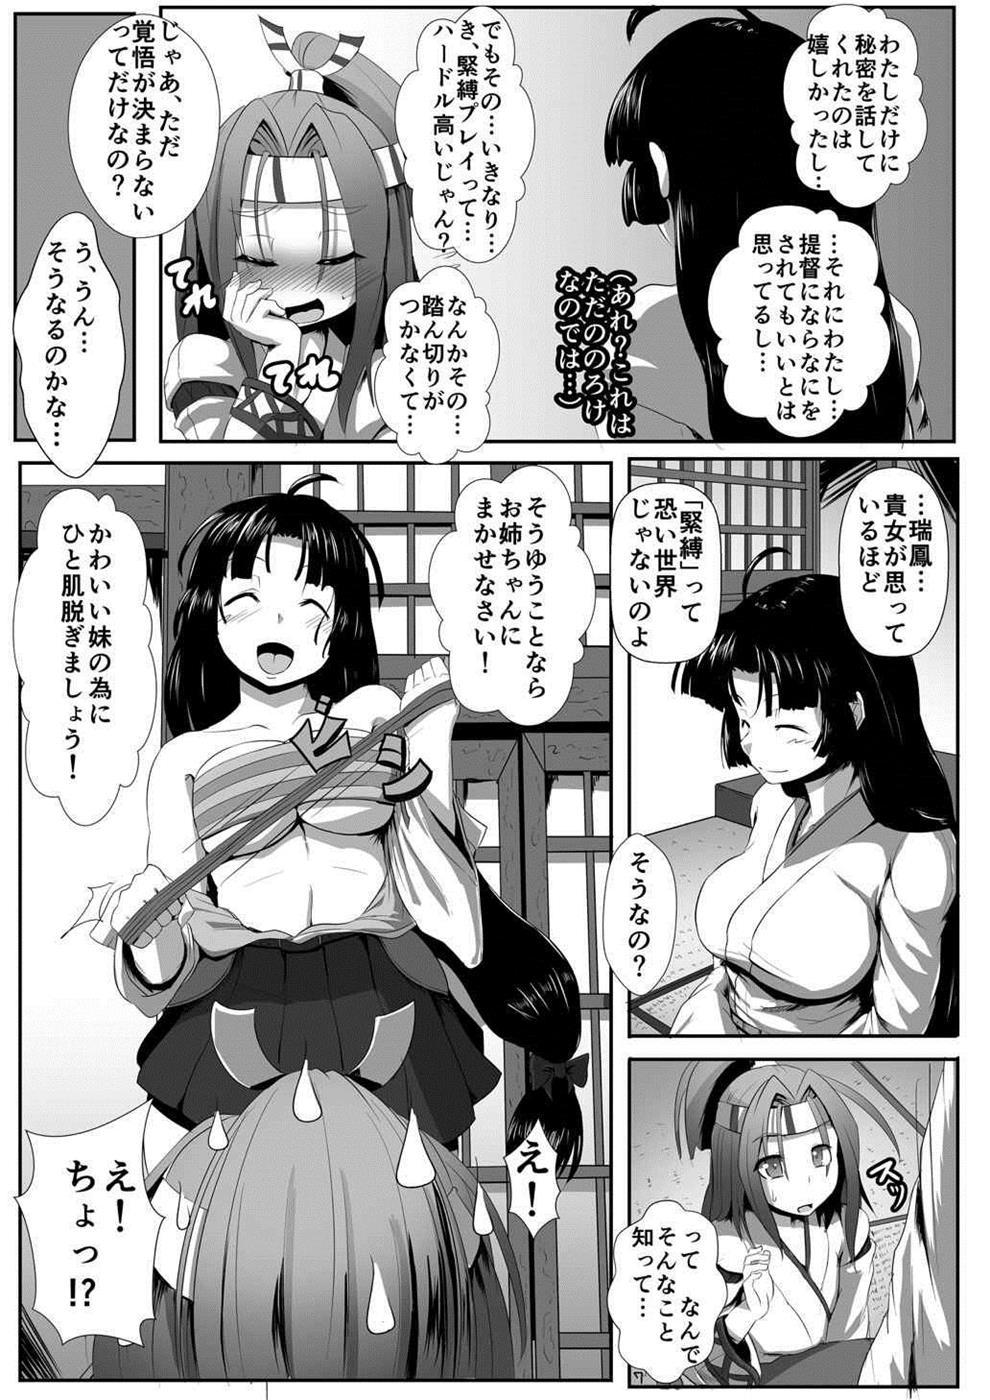 Teensnow Zuihou Taberyu? - Kantai collection Jerking Off - Page 6